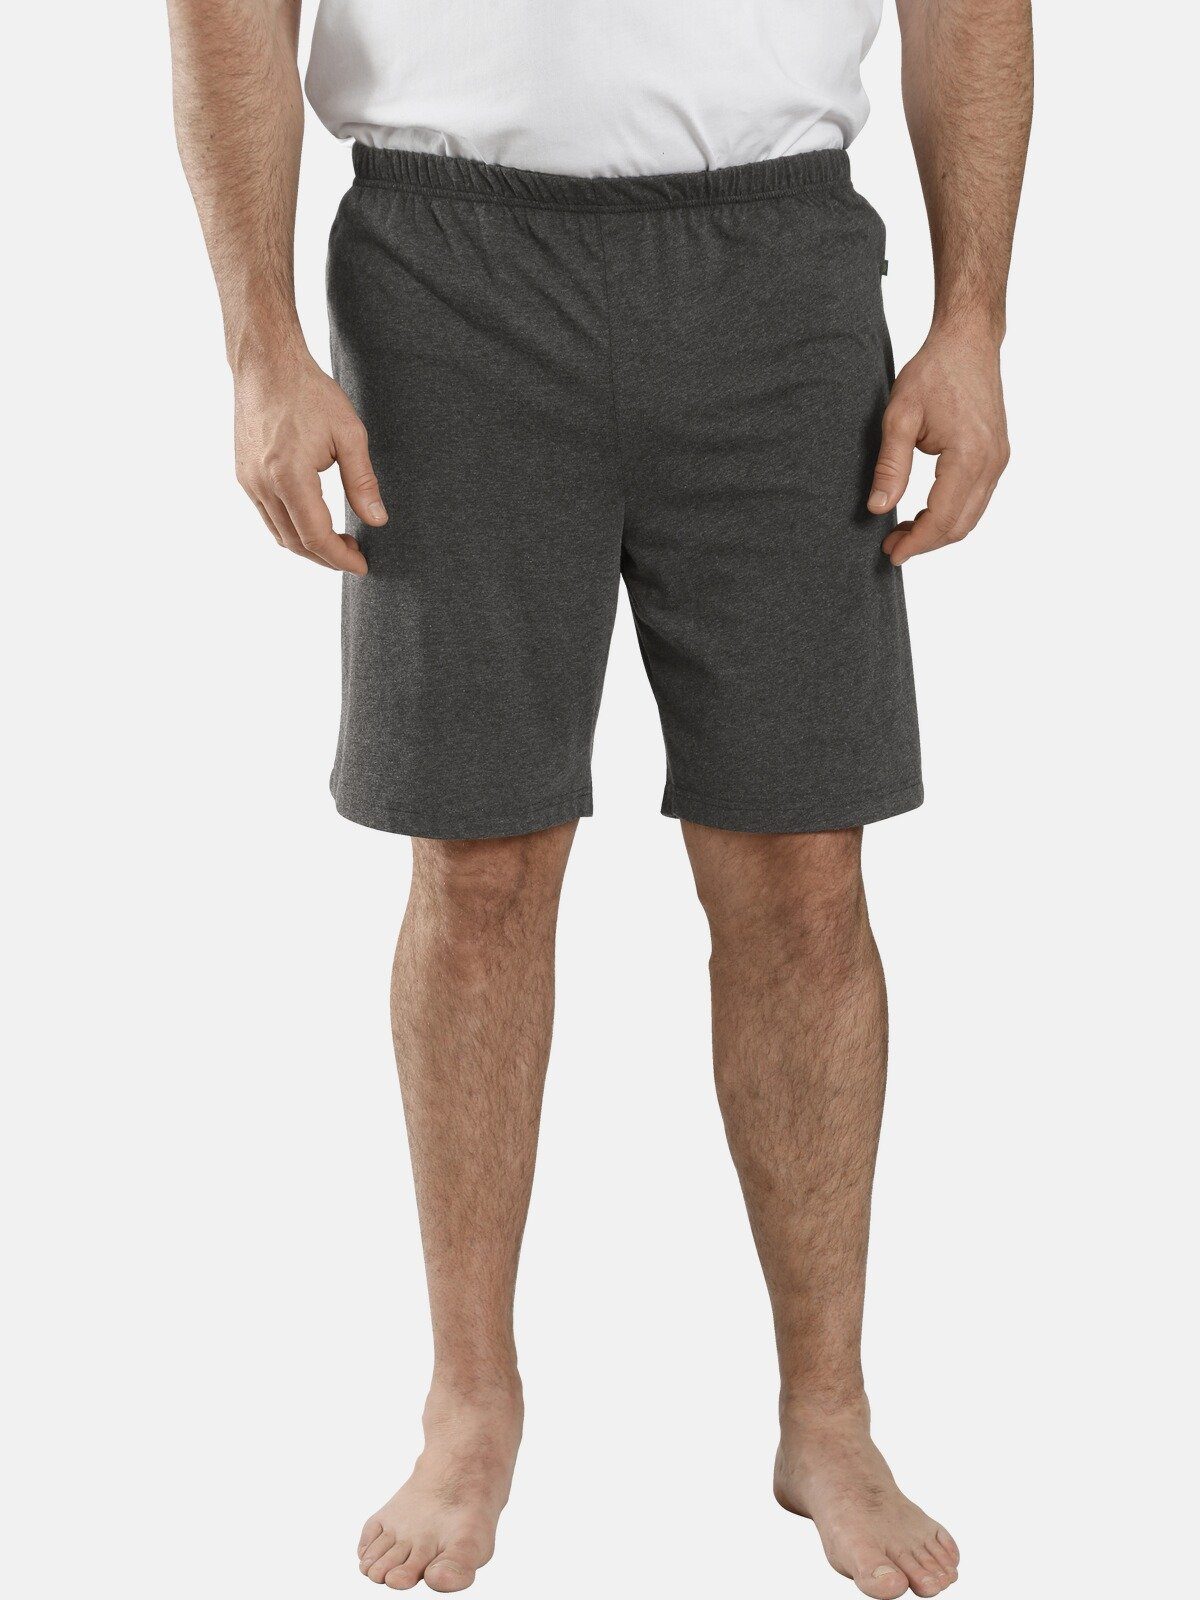 LORD Relaxshorts dunkelgrau leichte Charles Colby Schlafhose MYCROFT bequeme